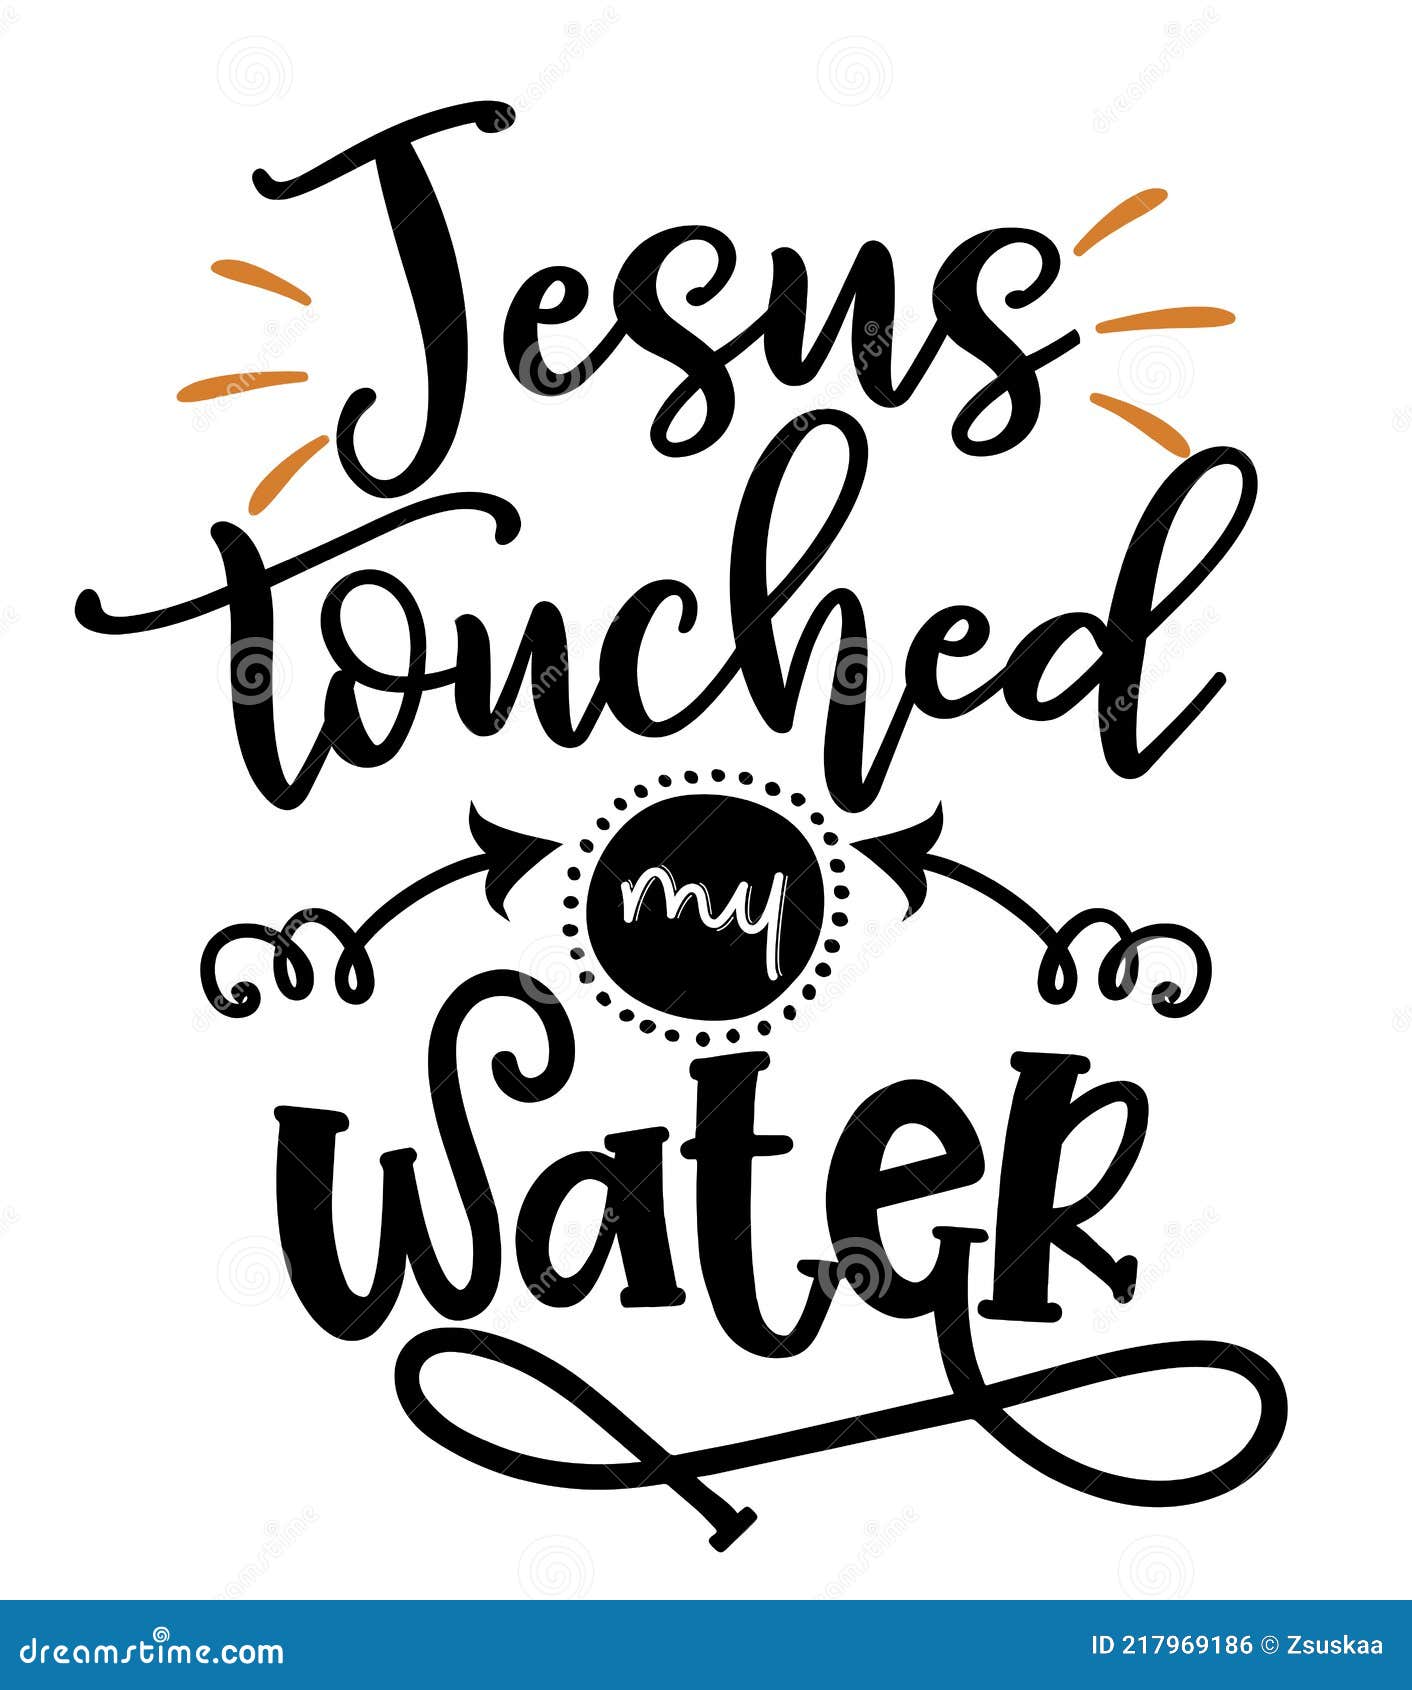 jesus touched my water - sassy calligraphy phrase for weekend party.